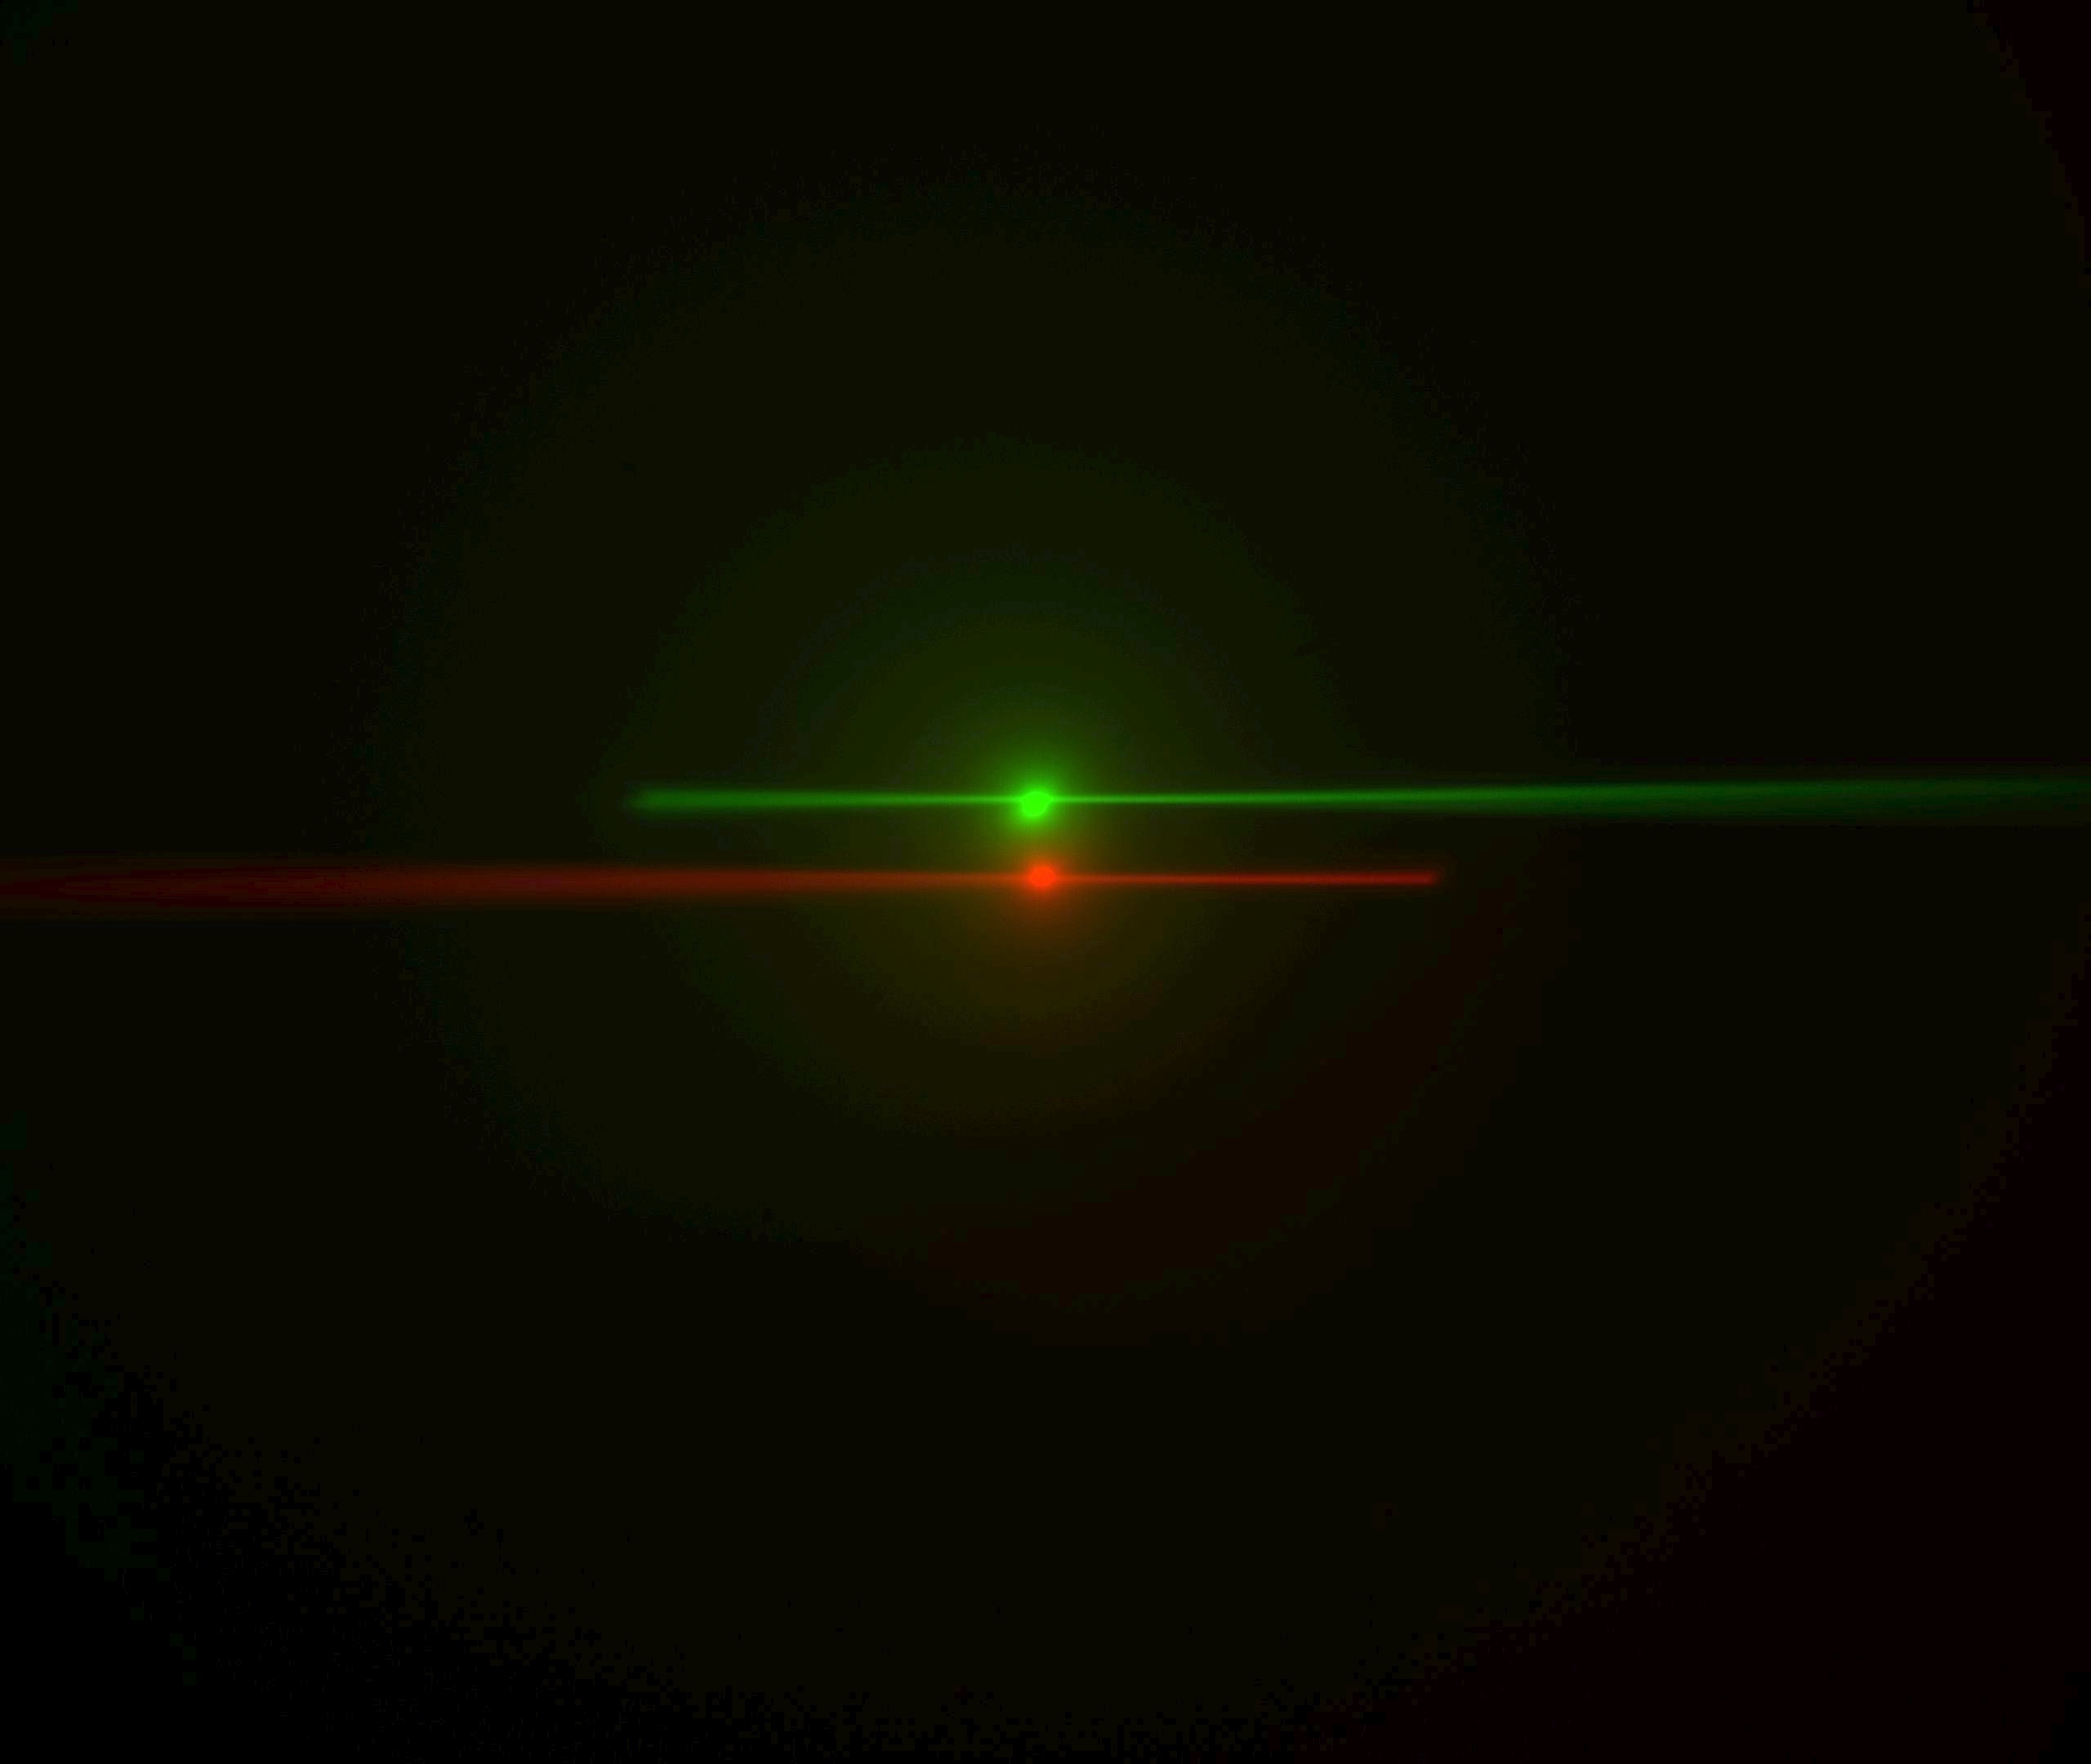  Laser beams seen by cameras in conventional orientation. The green image is from the left-side camera and shows the beam from the right-side scanner entering from the right and eventually stiking the coverslip where it stops. The red image is from the right-side camera, shows the beam from the left-side scanner entering from the left. The bright spots are the epi-fluorescent excitation from the scanner on the same side as the respective cameras. The following statement will be understood after going though the alignment: the objective lateral alignment is perfect because the epi and beams exactly overlap, but the camera mirrors need to be adjusted slightly to put both epi spots in the image center.